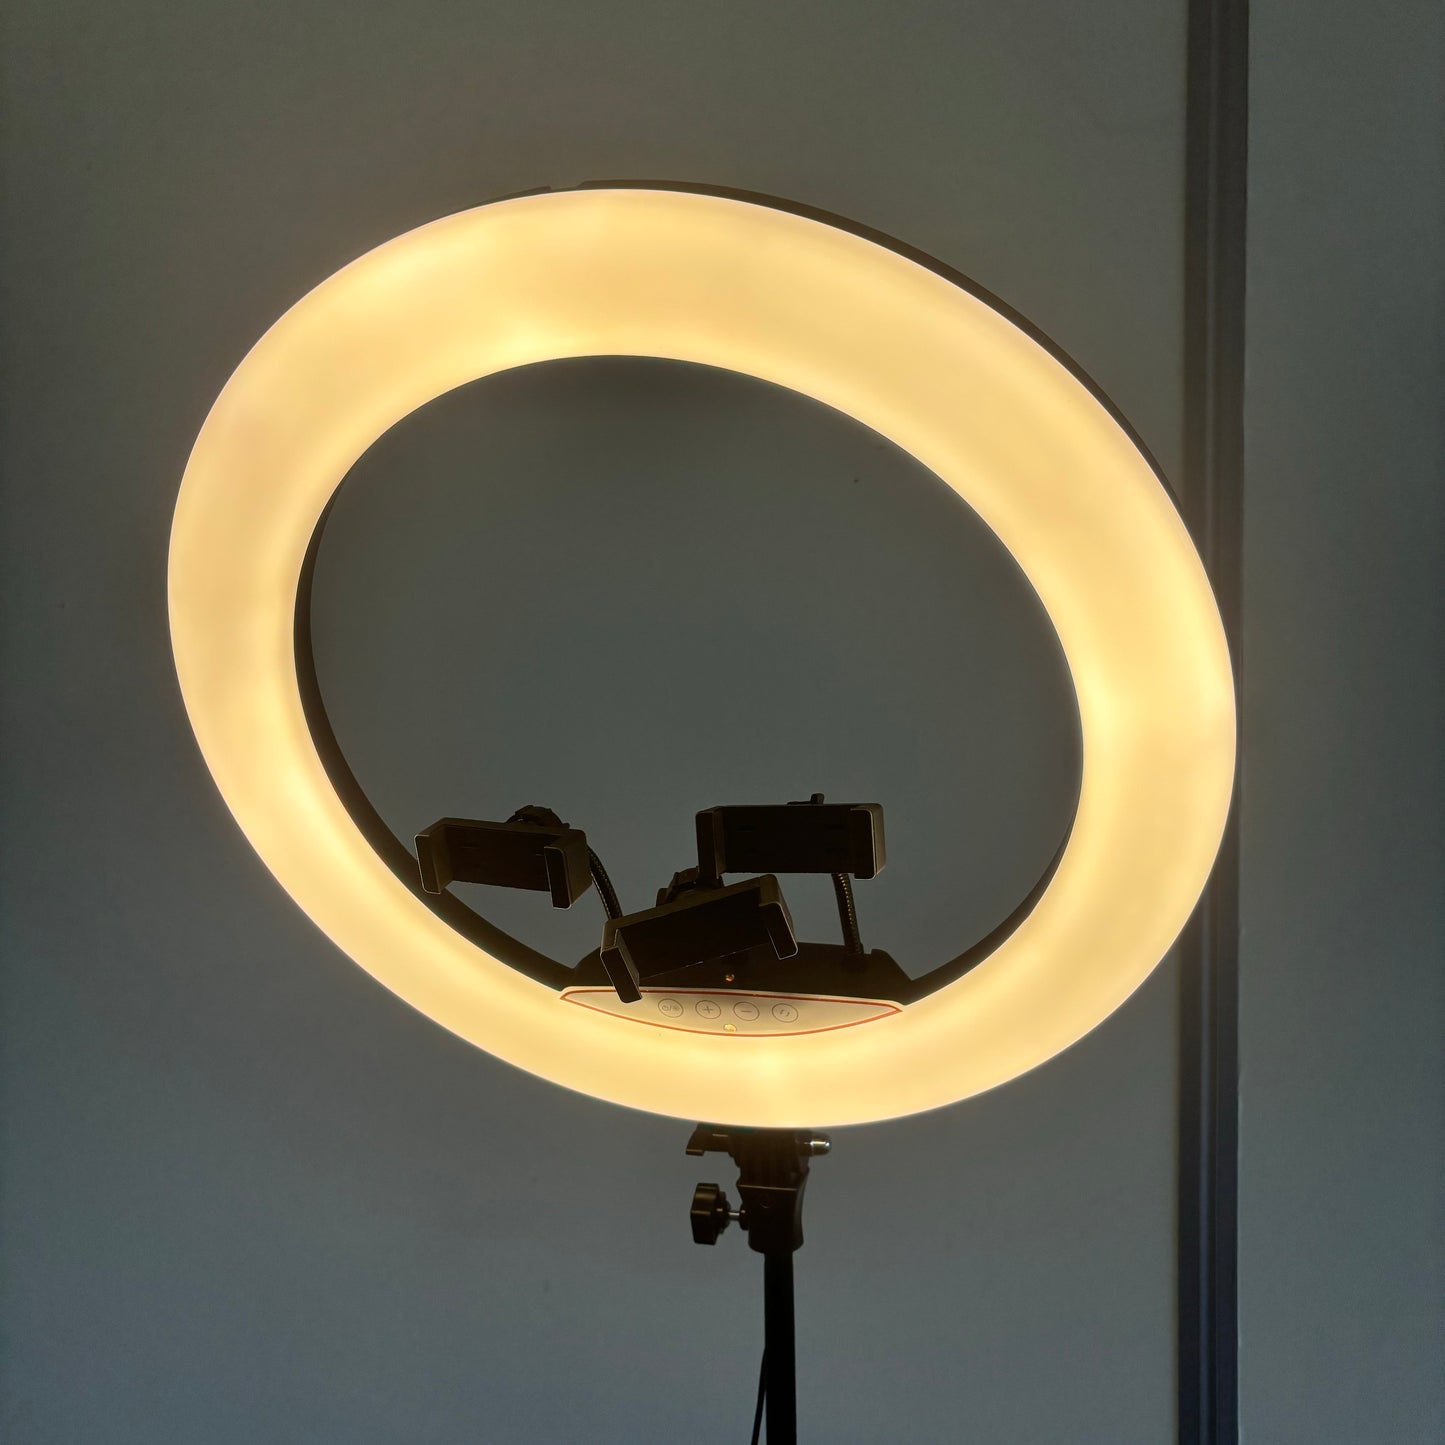 LED Soft Ring Light with Triple Phone/Camera Holder